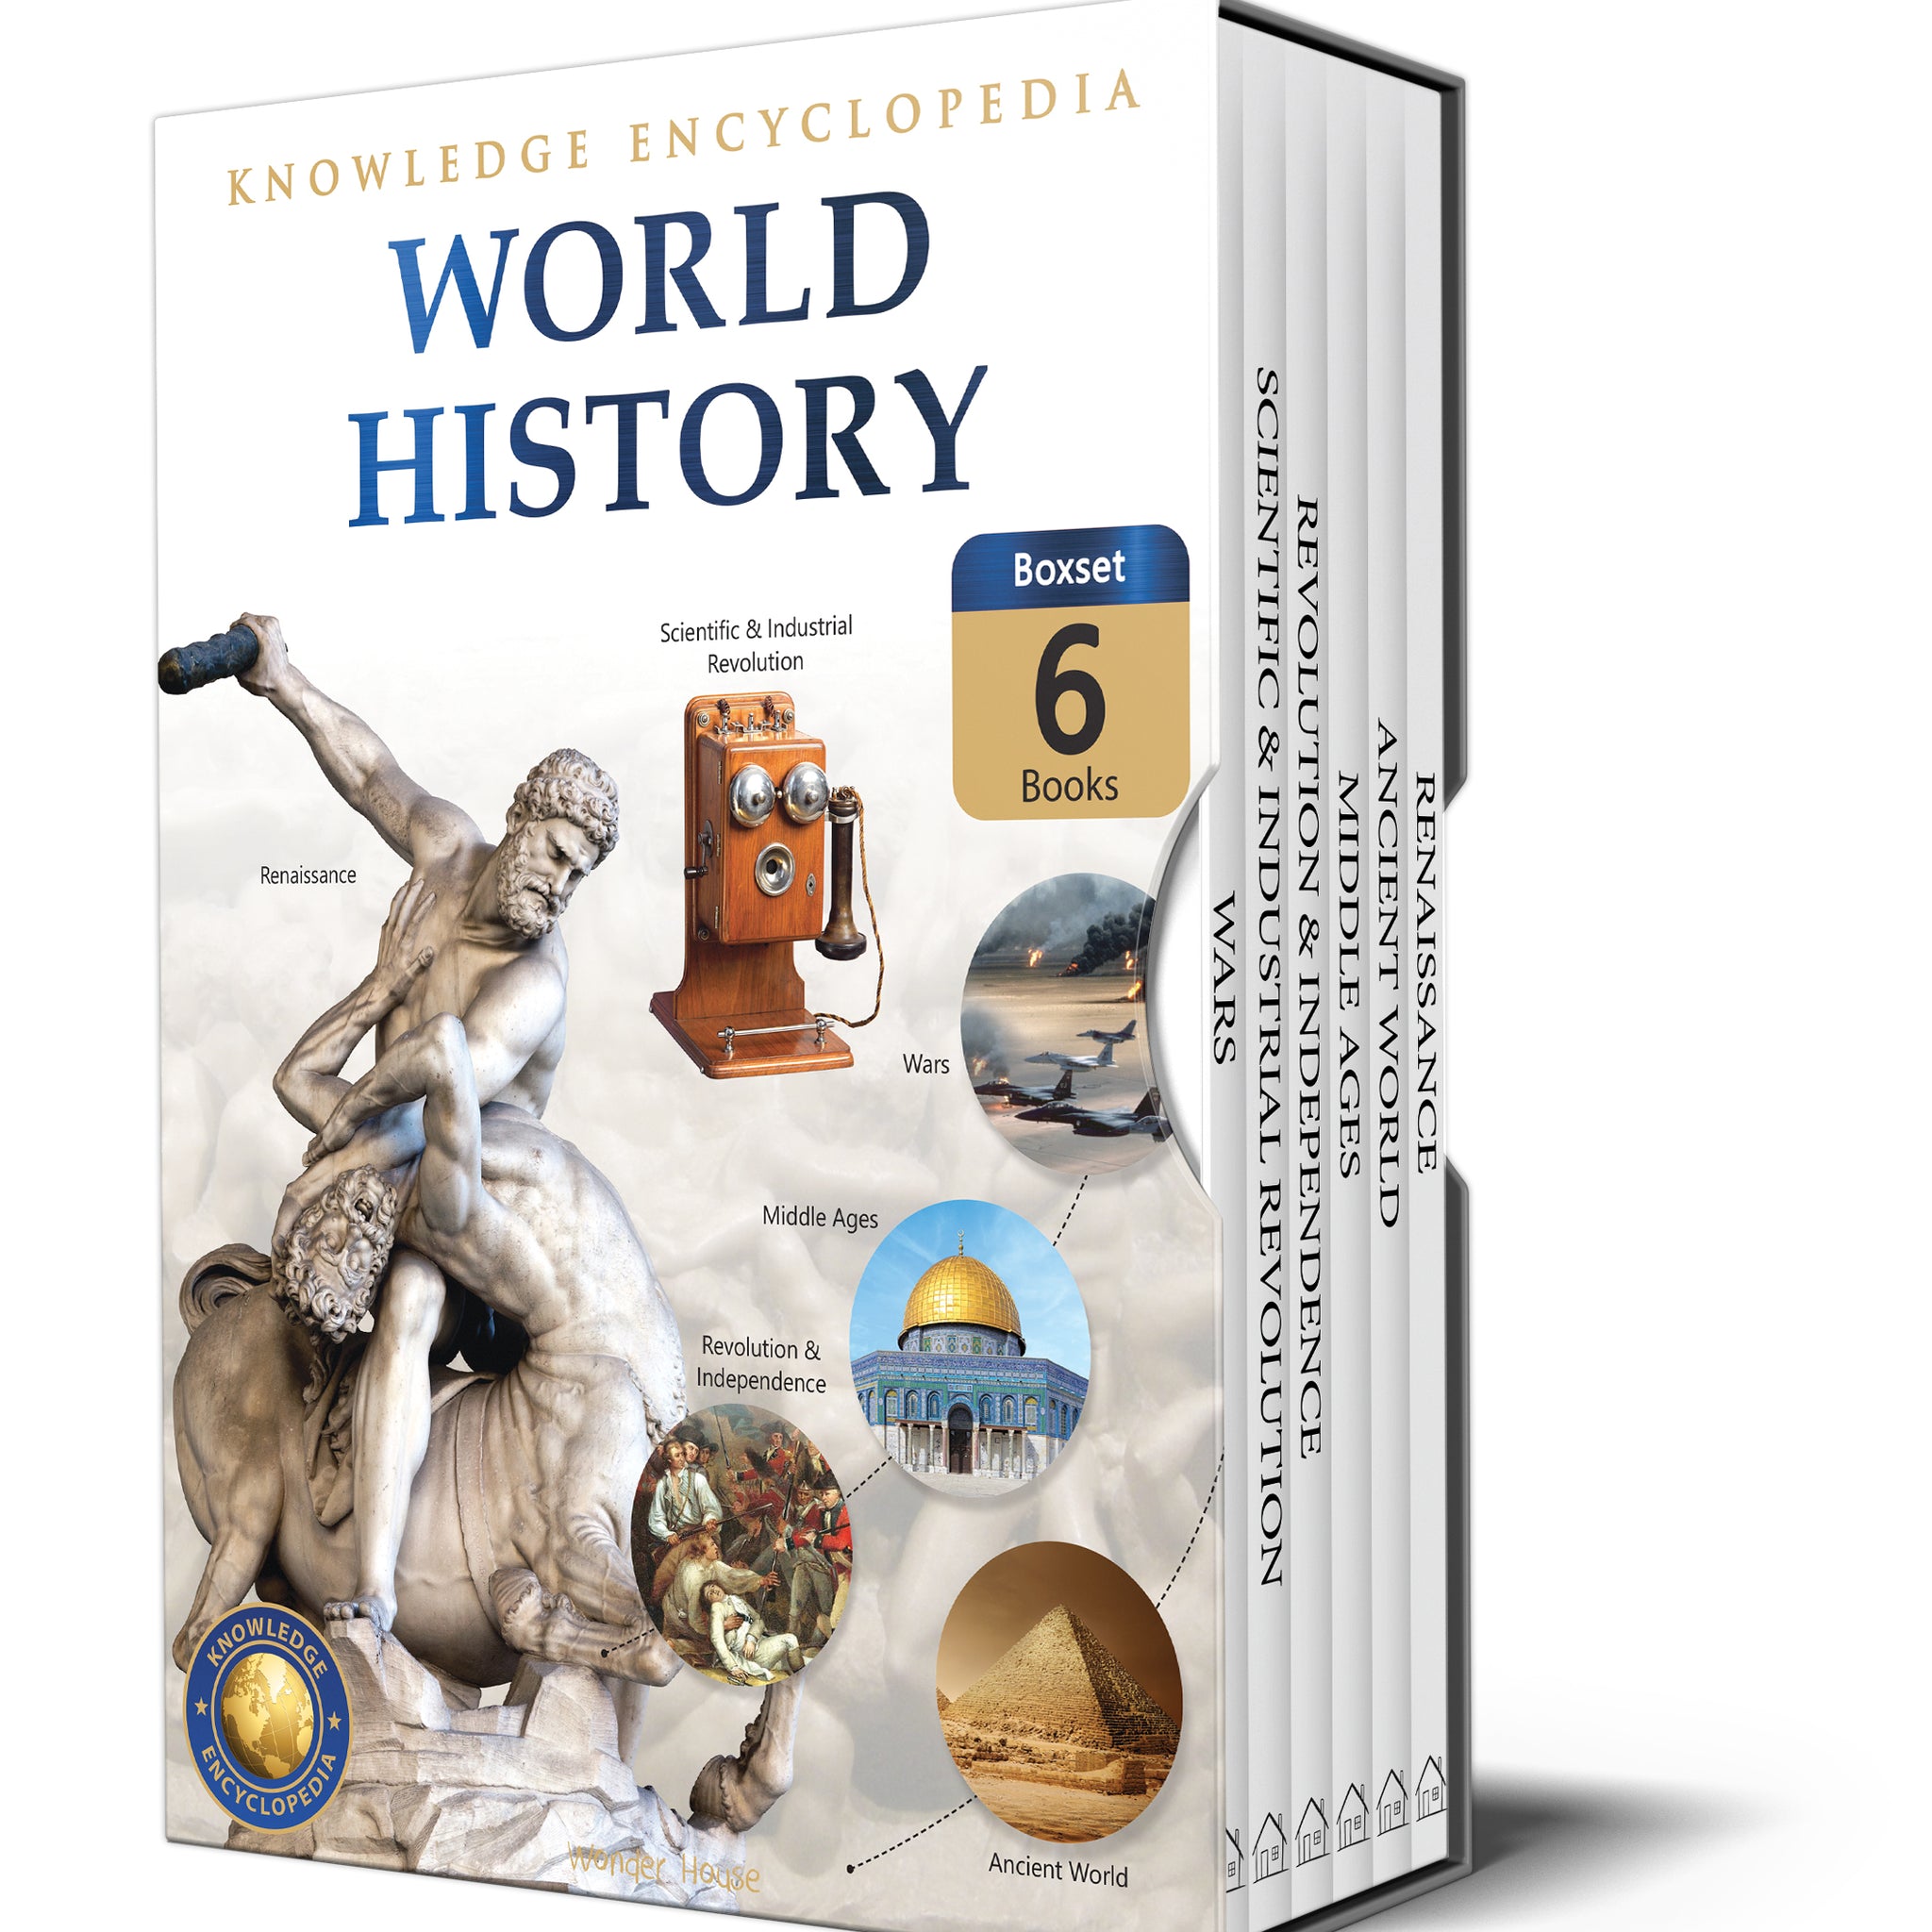 World History - Collection of 6 Books : Knowledge Encyclopedia For Children (Box Set)